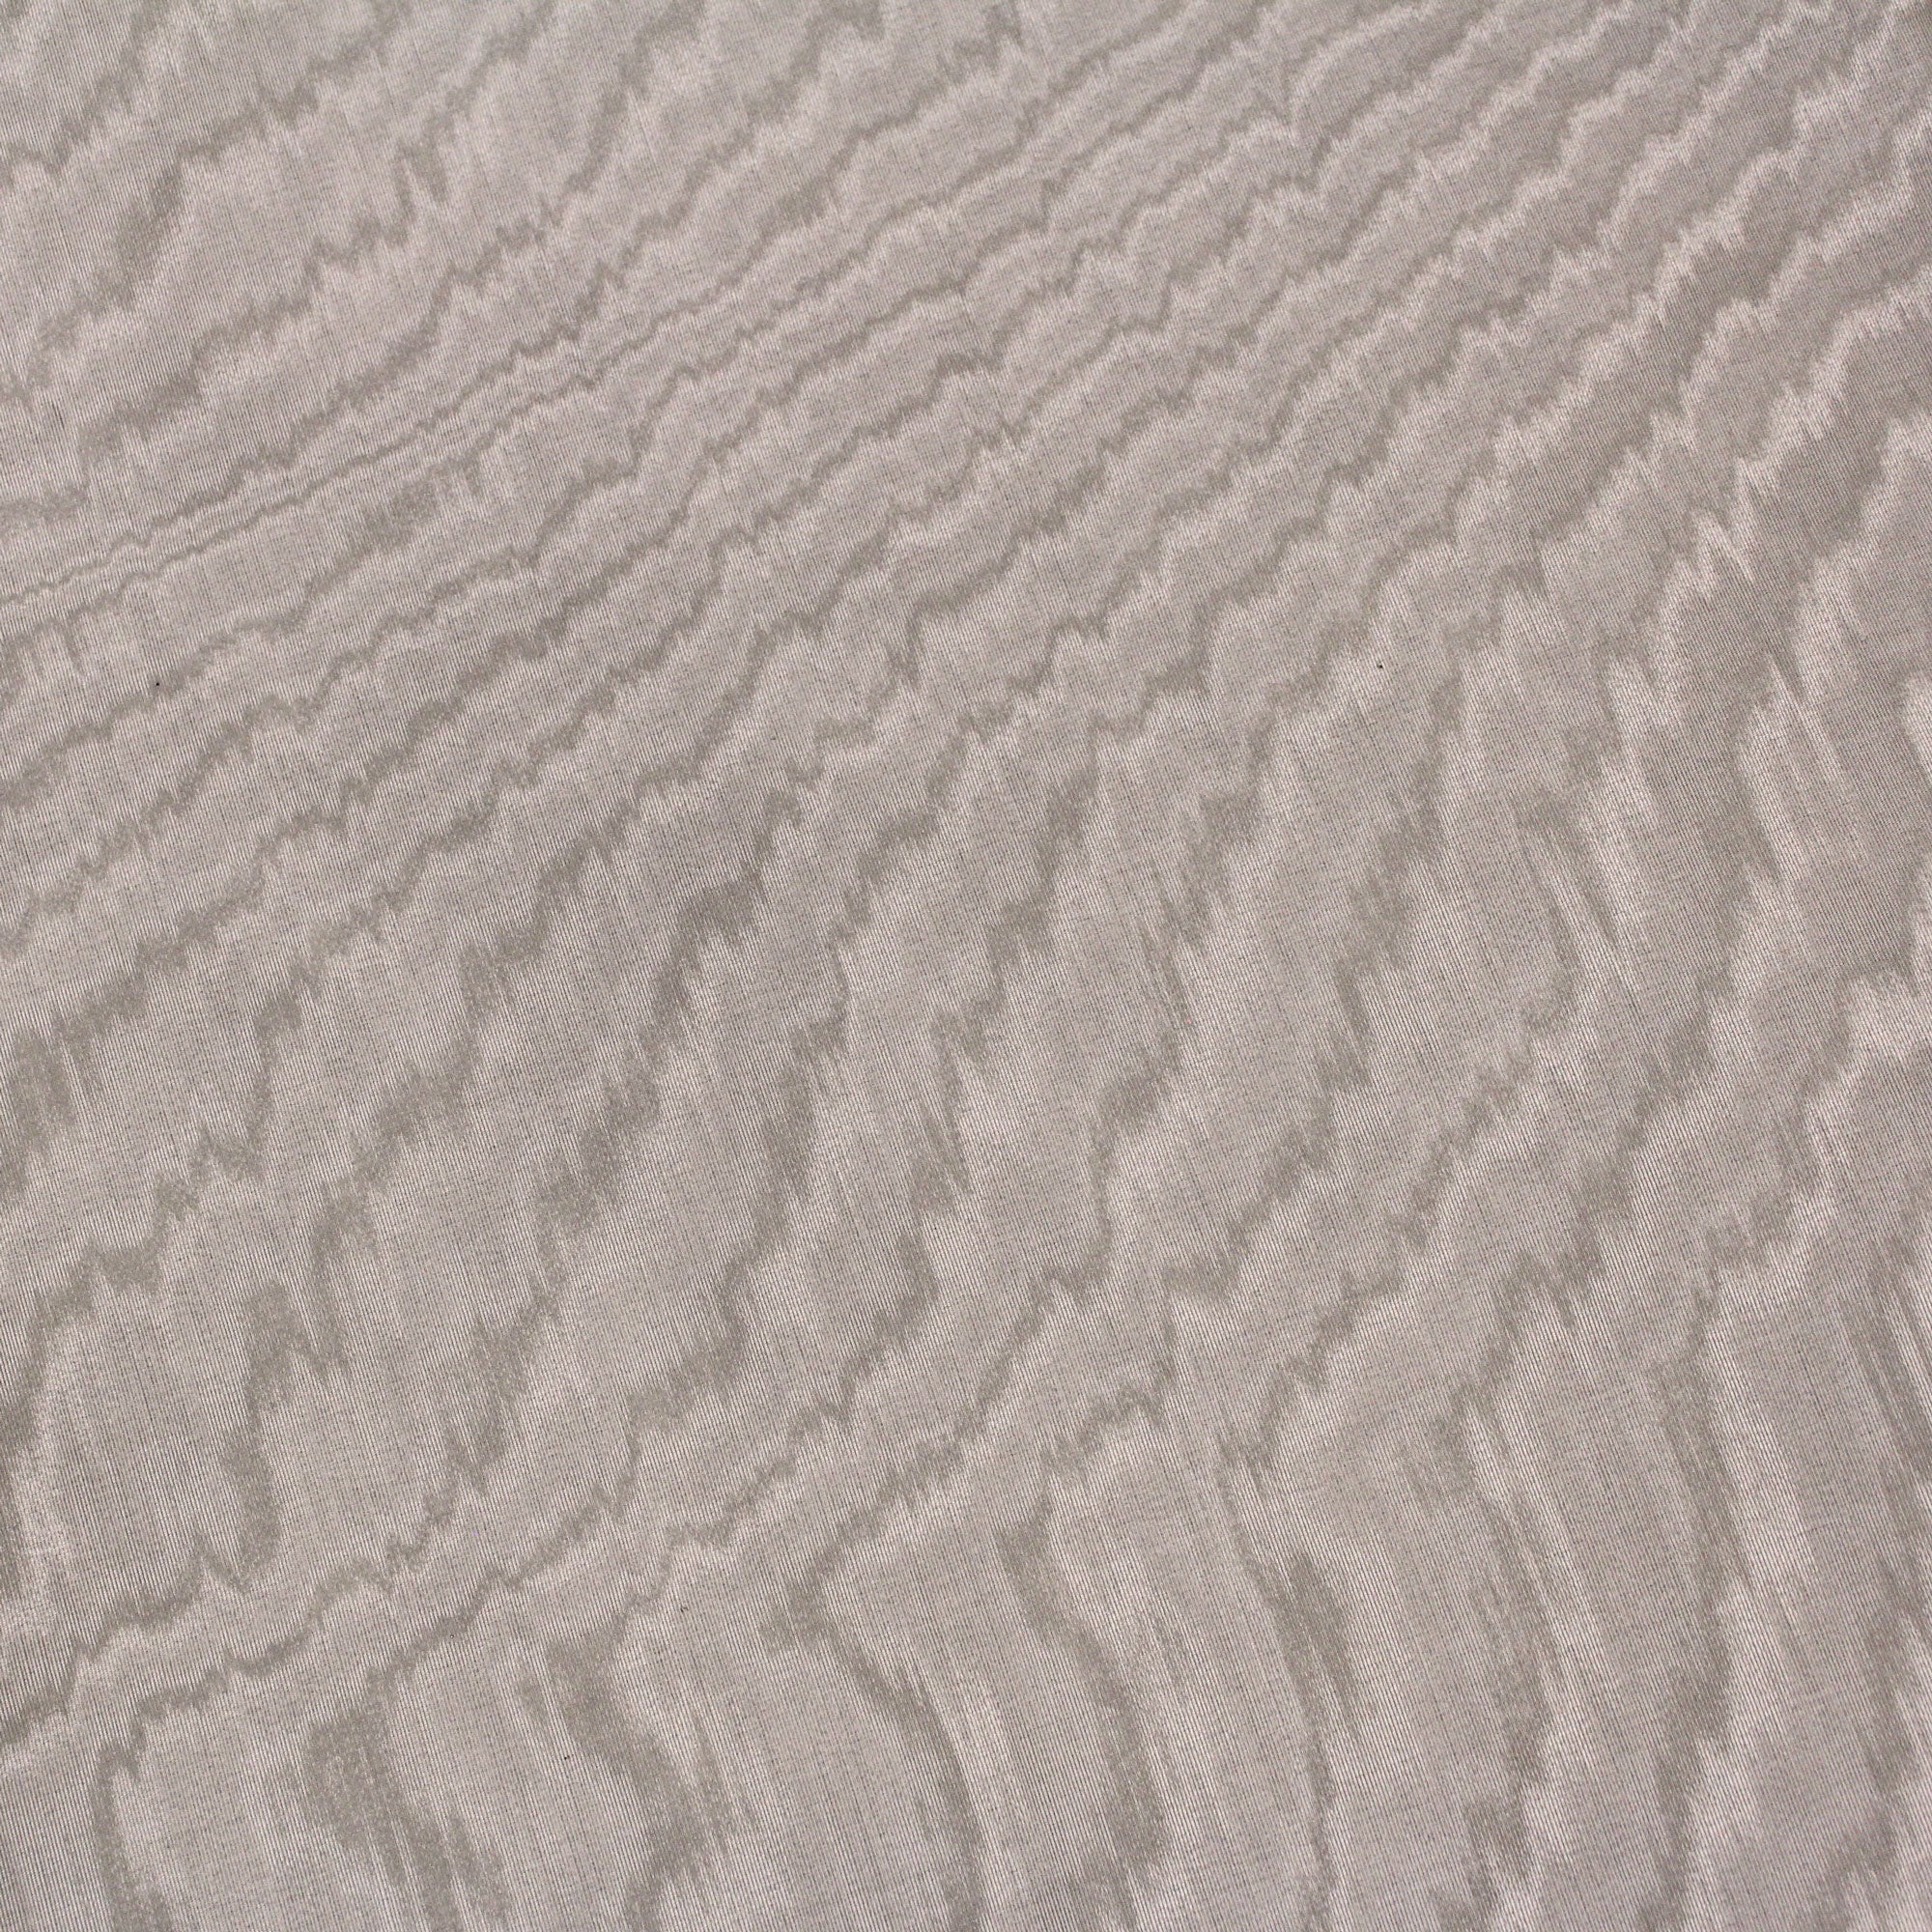 Moire fabric coupon in sand beige viscose and cotton